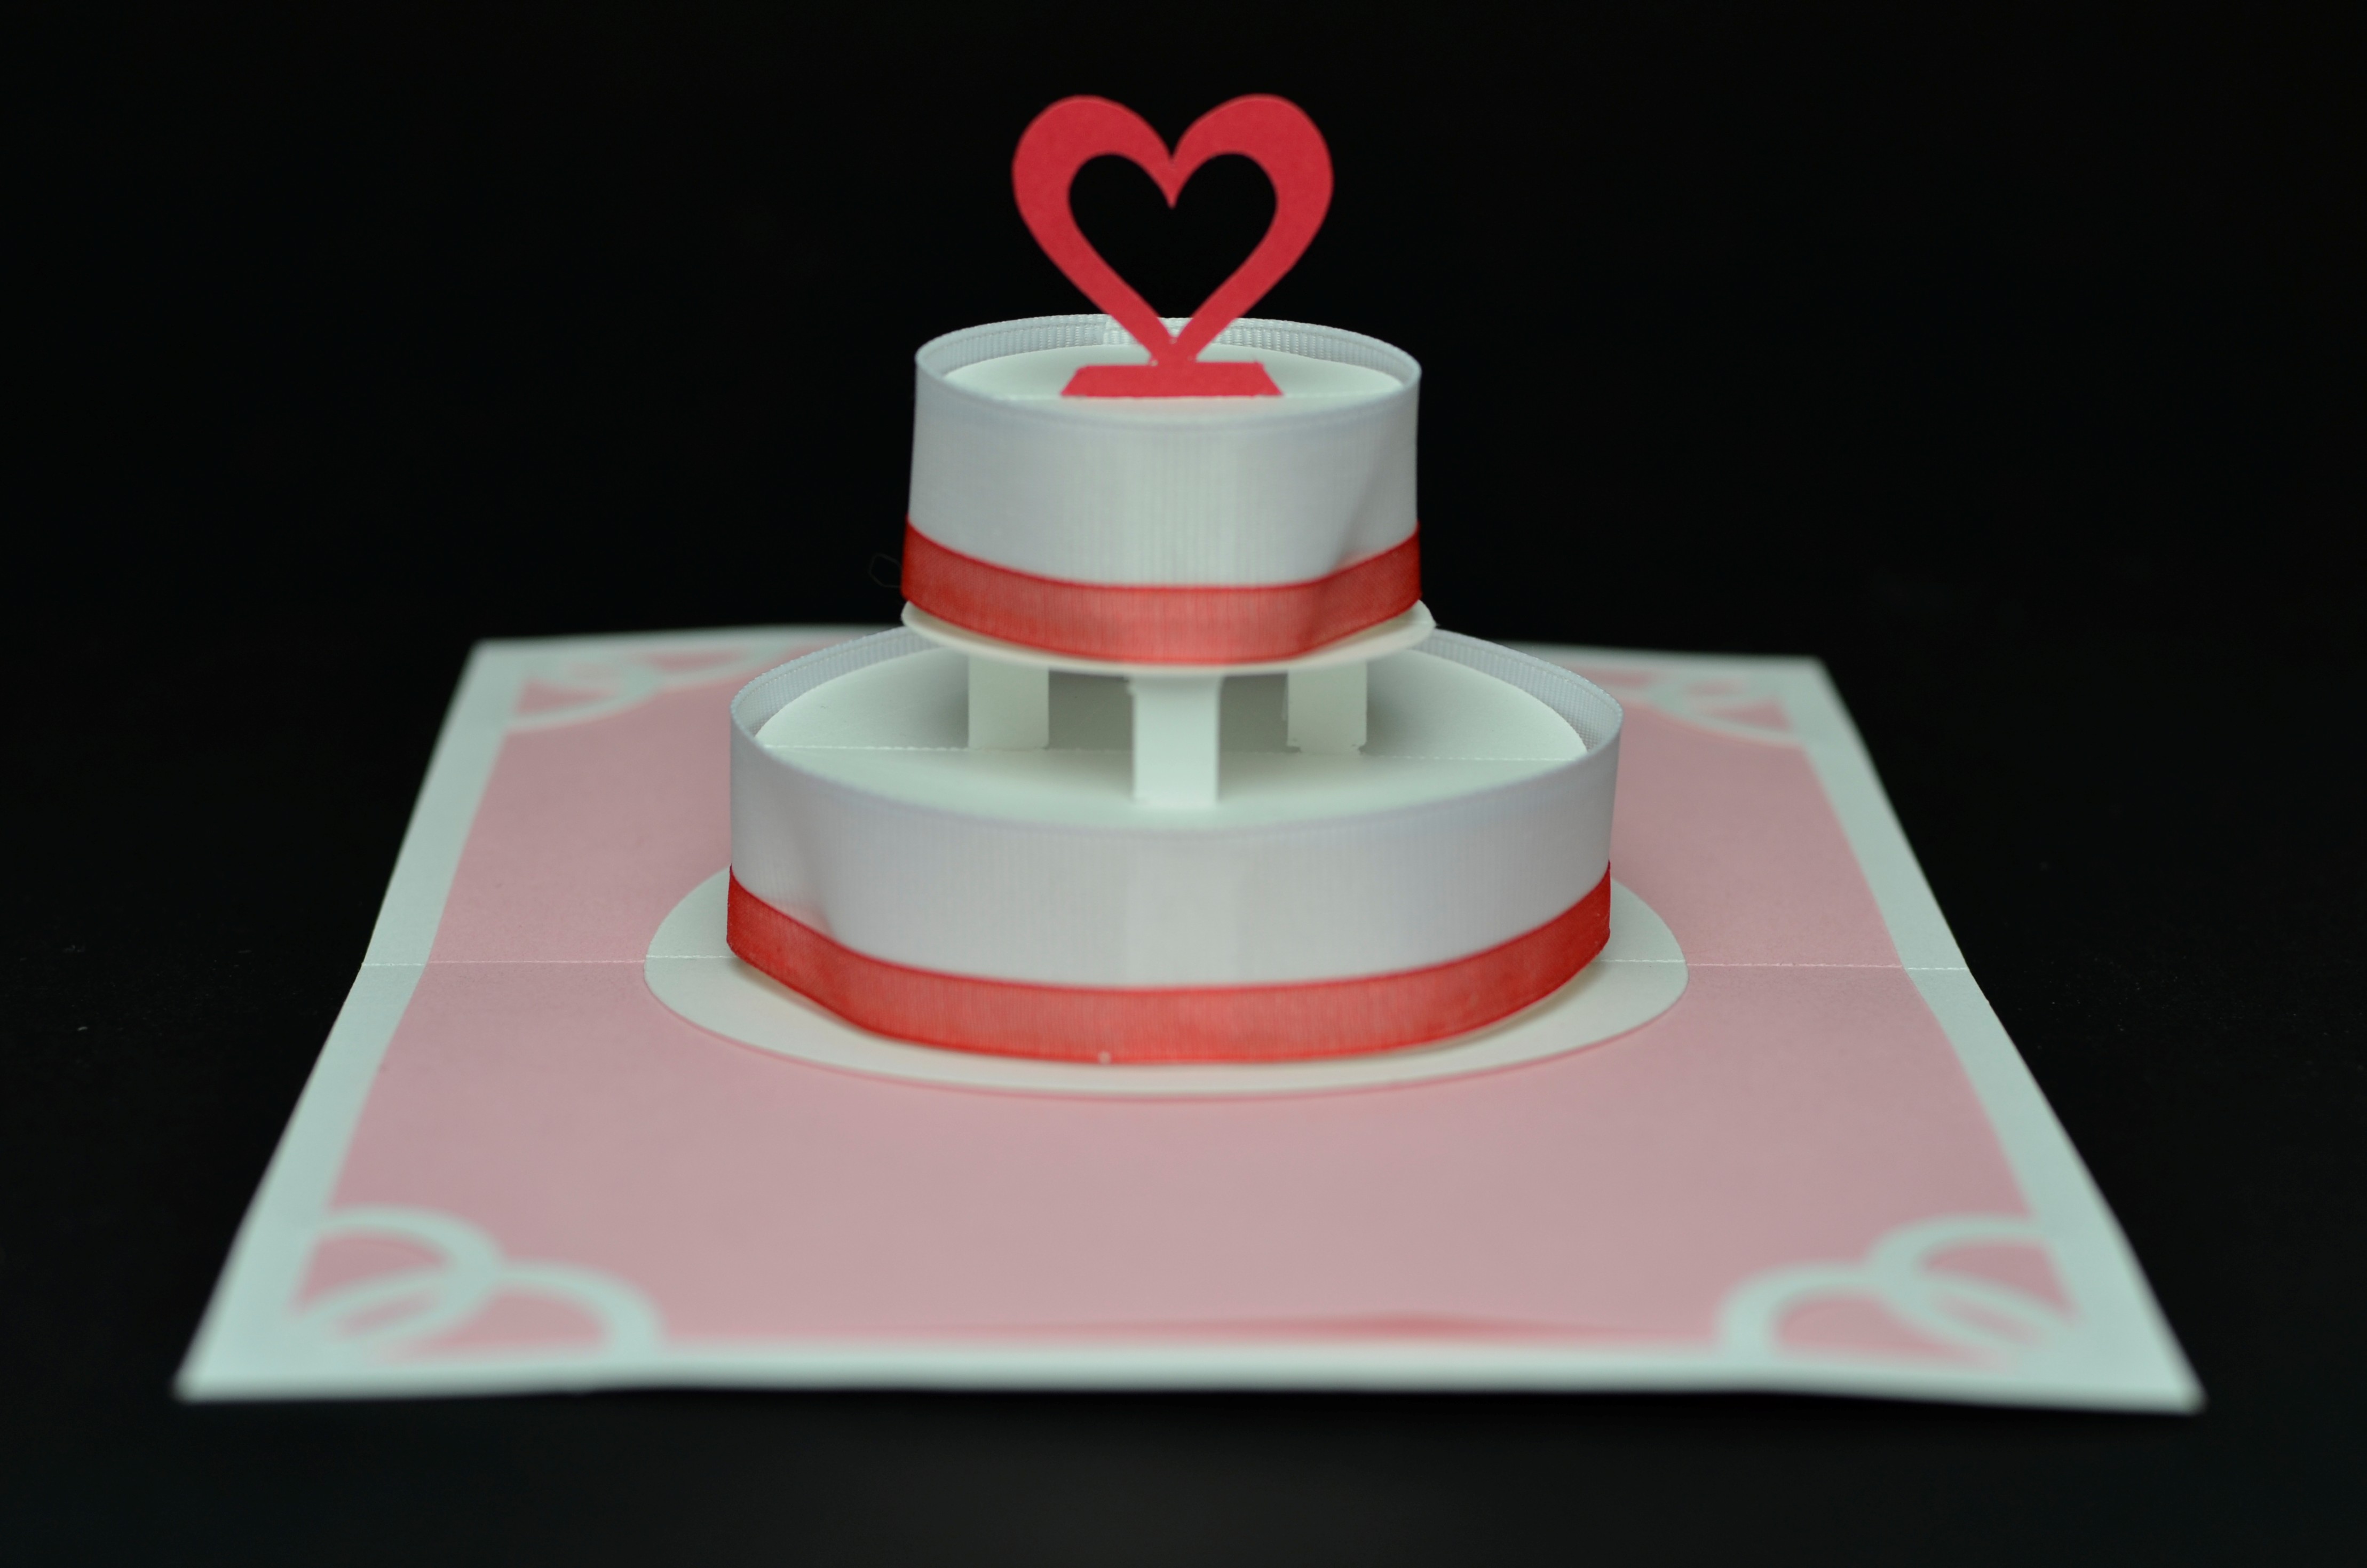 two-ribbon-wedding-cake-pop-up-card-creative-pop-up-cards